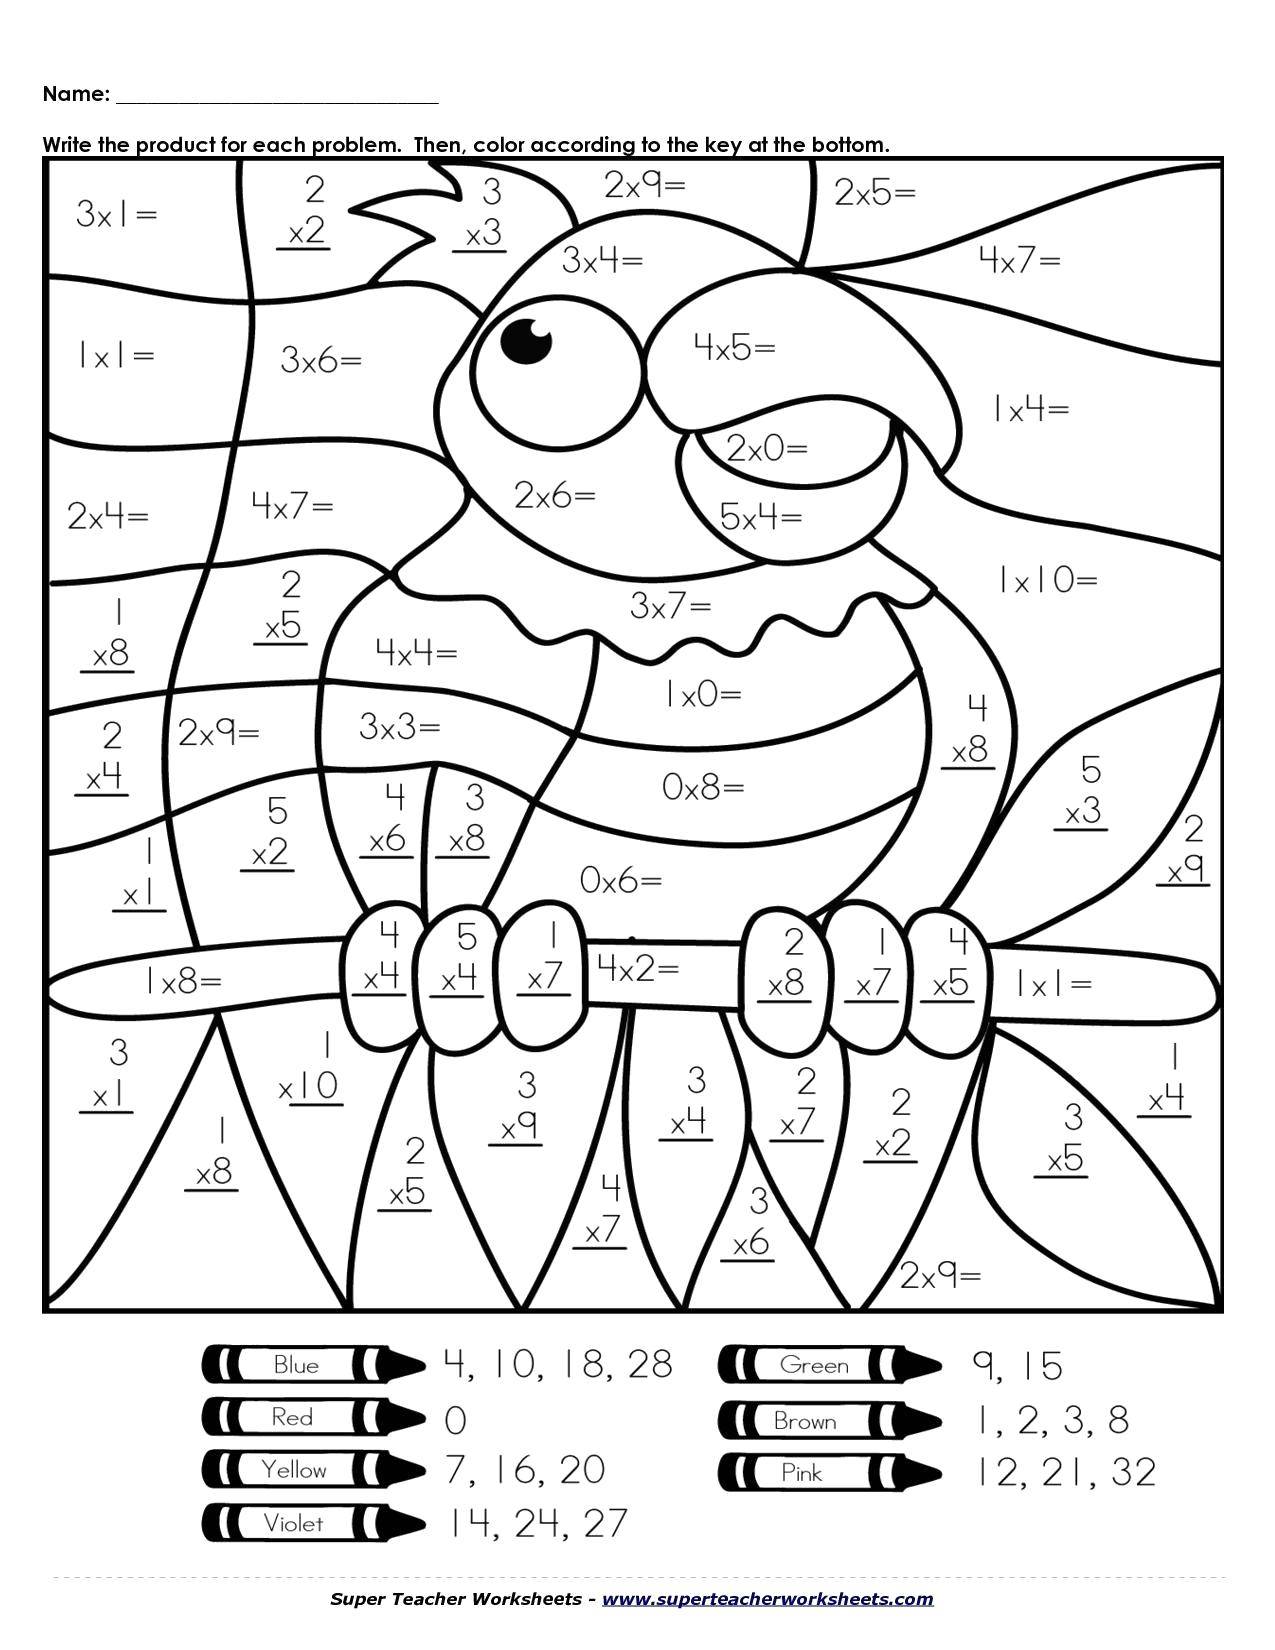 Coloring Solve examples and paint a parrot. Category mathematical coloring pages. Tags:  Math, counting, logic.